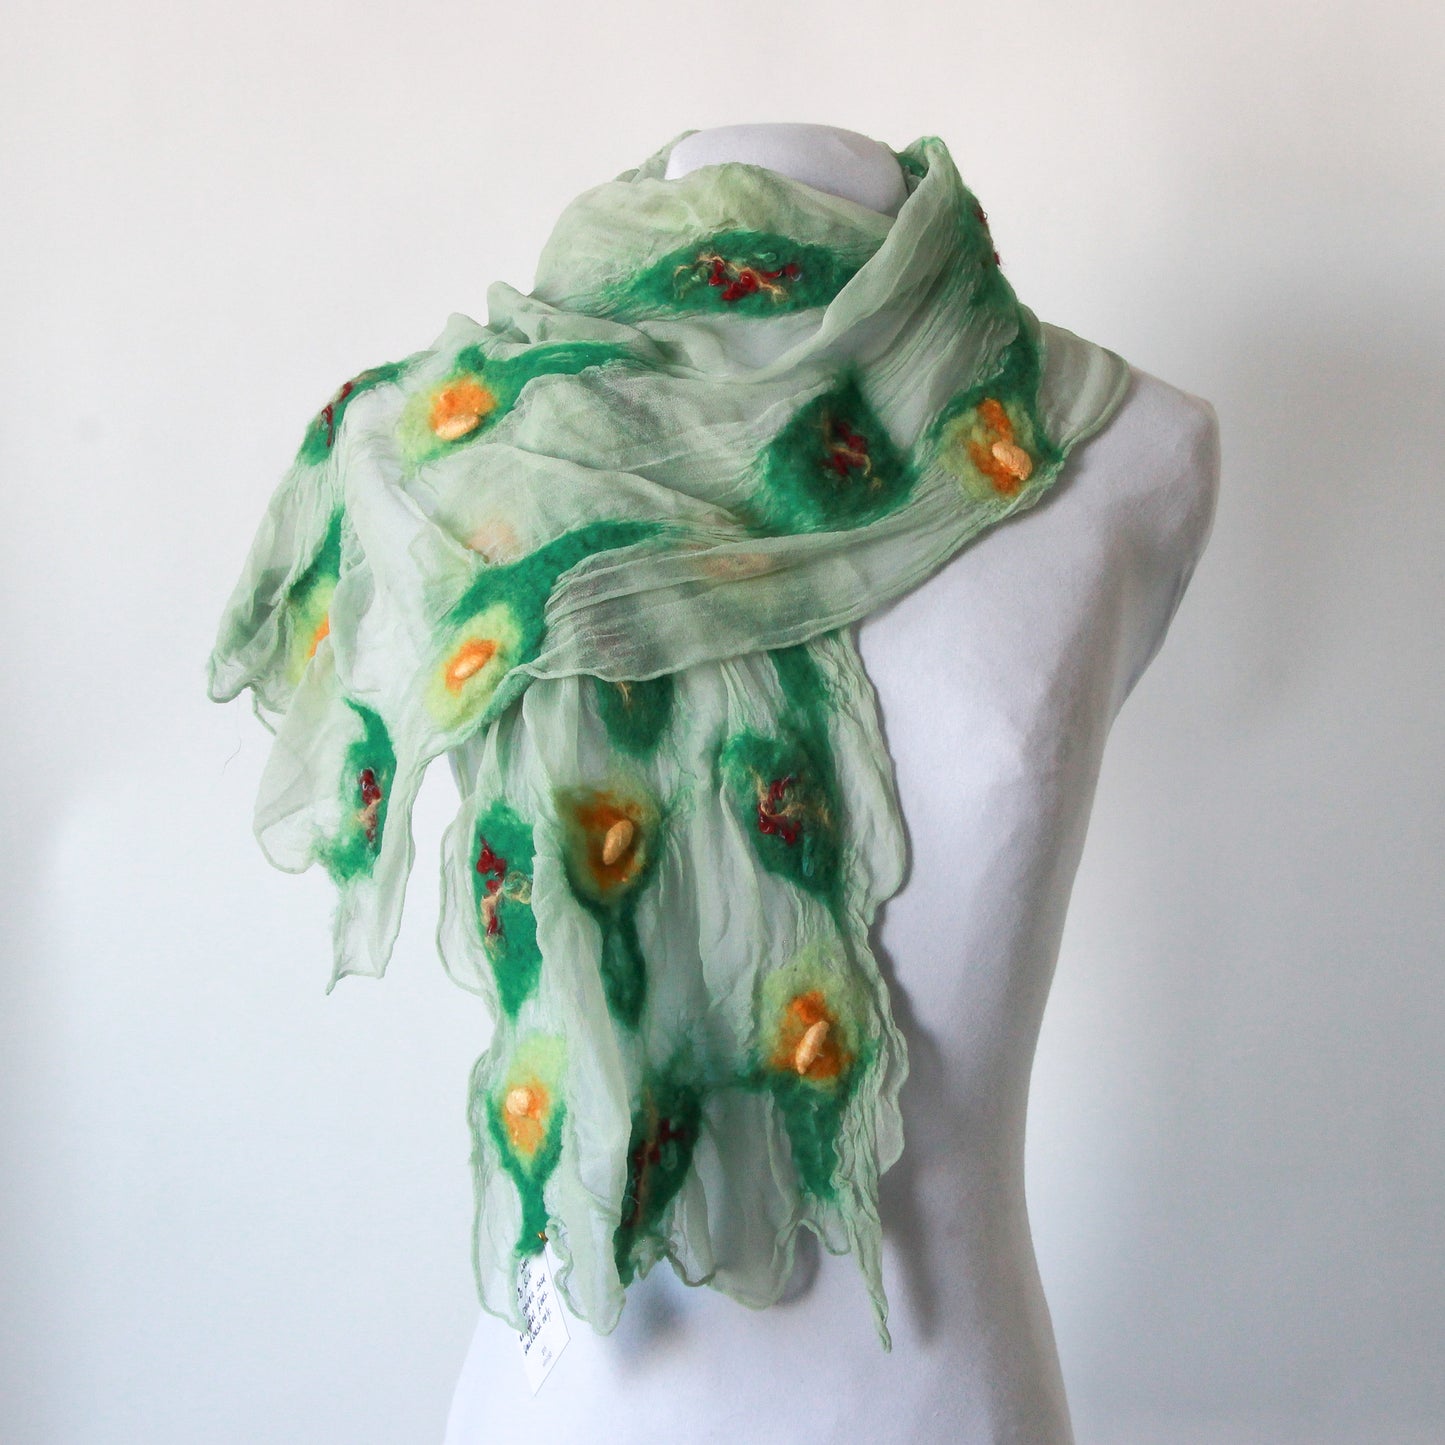 Mint scarf with green and yellow felted sections